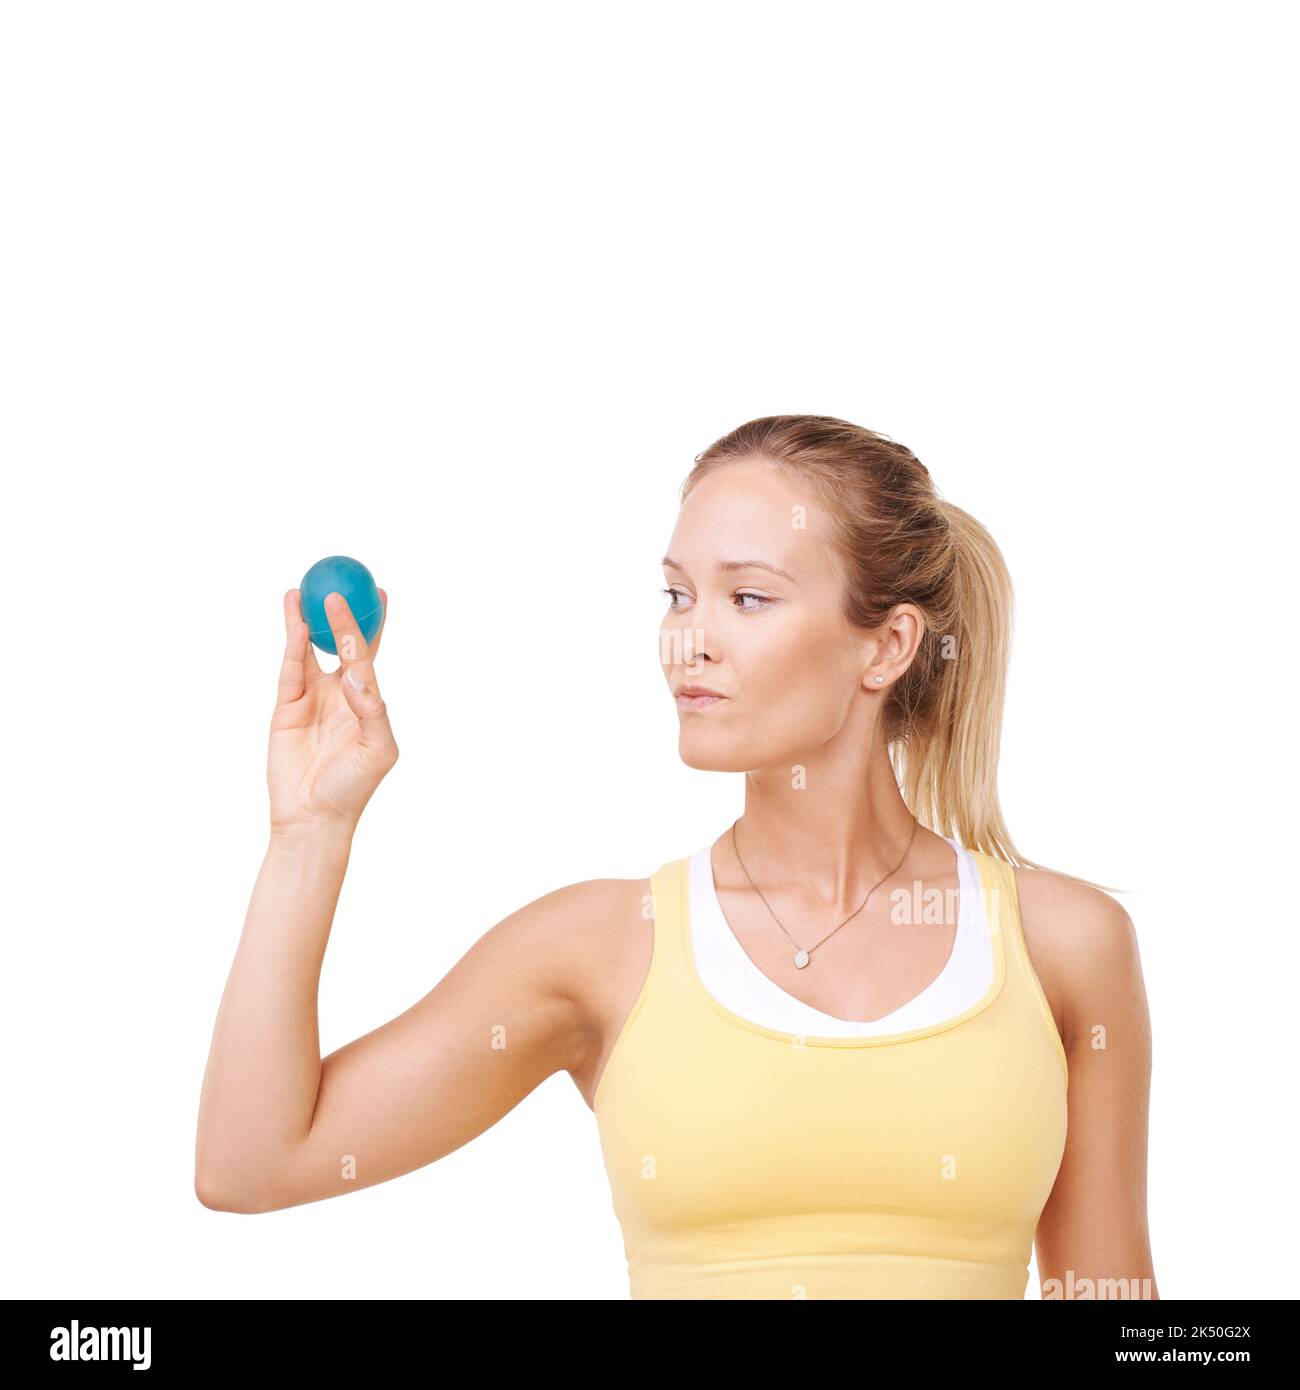 Getting rid of all her tension. Cropped view of a woman squeezing a stress ball against a white background. Stock Photo